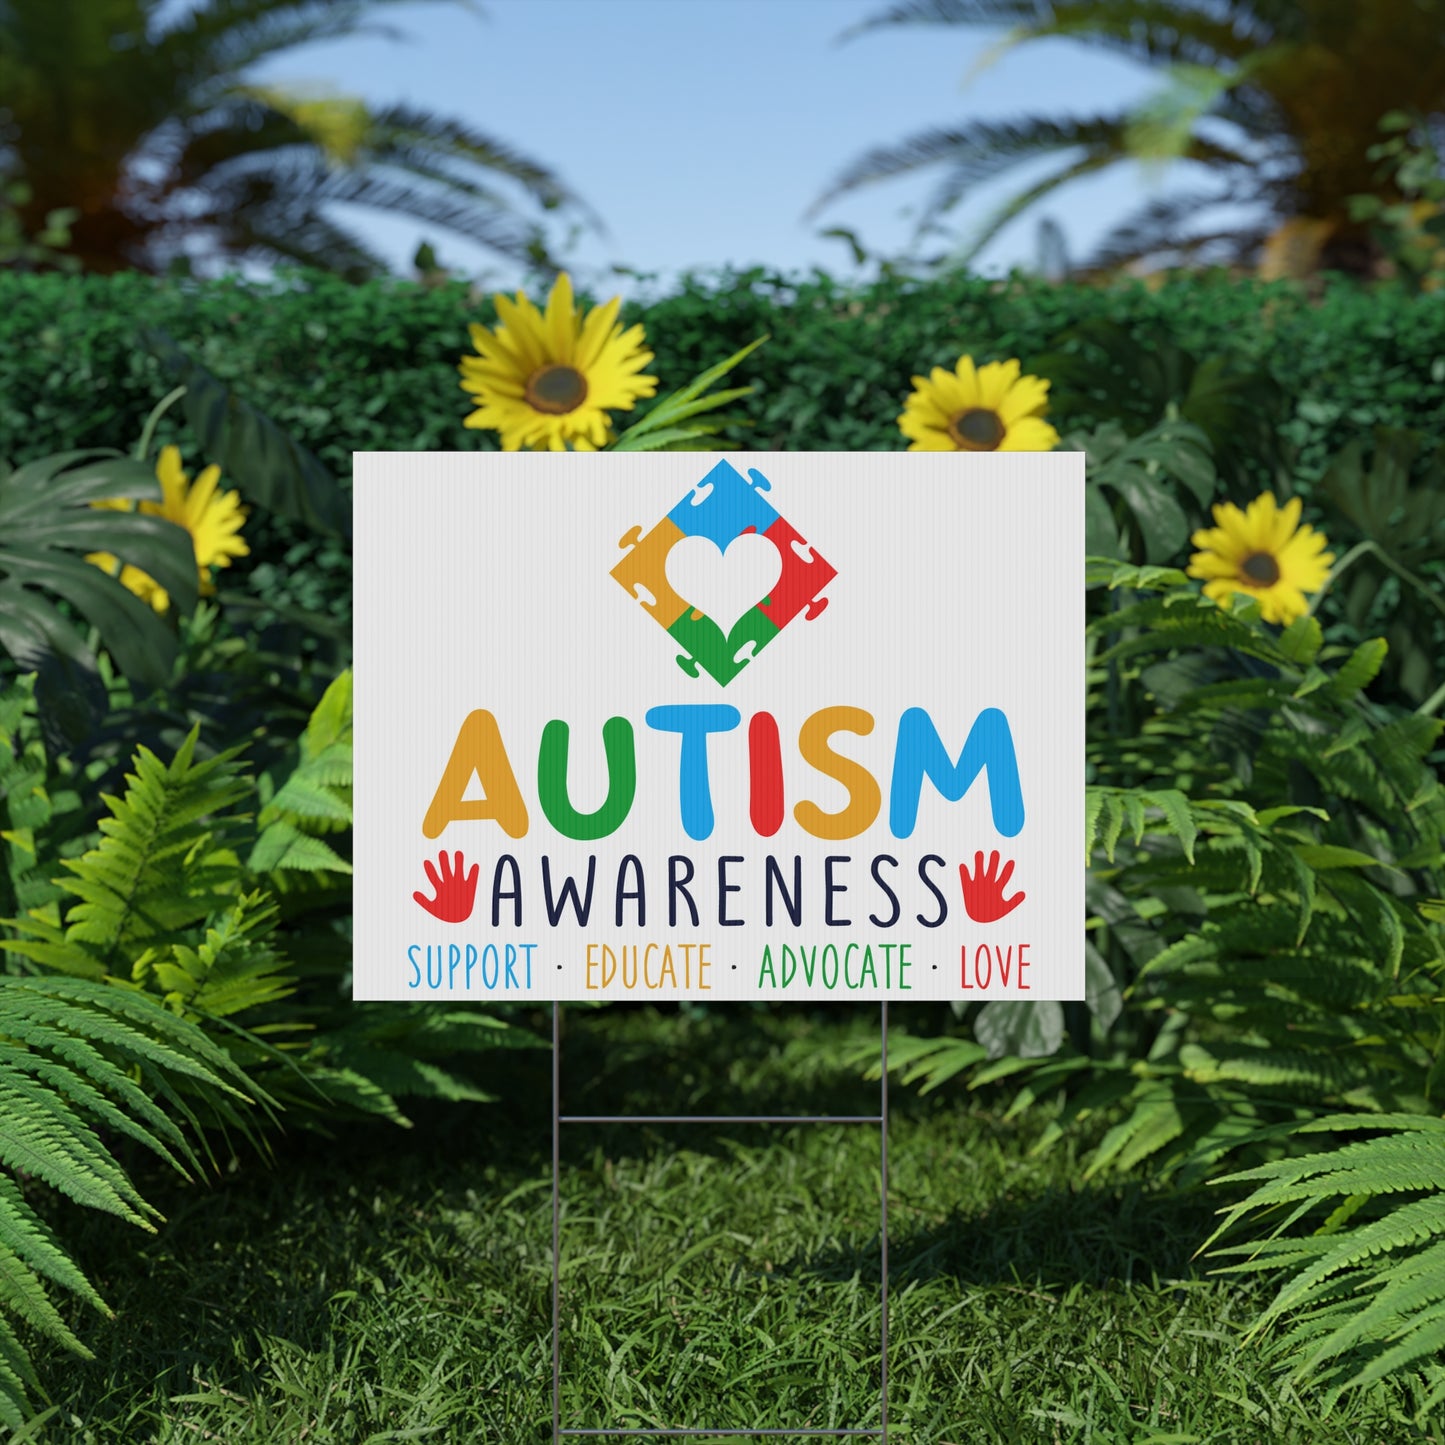 Autism Awareness Yard Sign, 18x12, 24x18, 36x24, Double Sided, H-Stake Included, v3